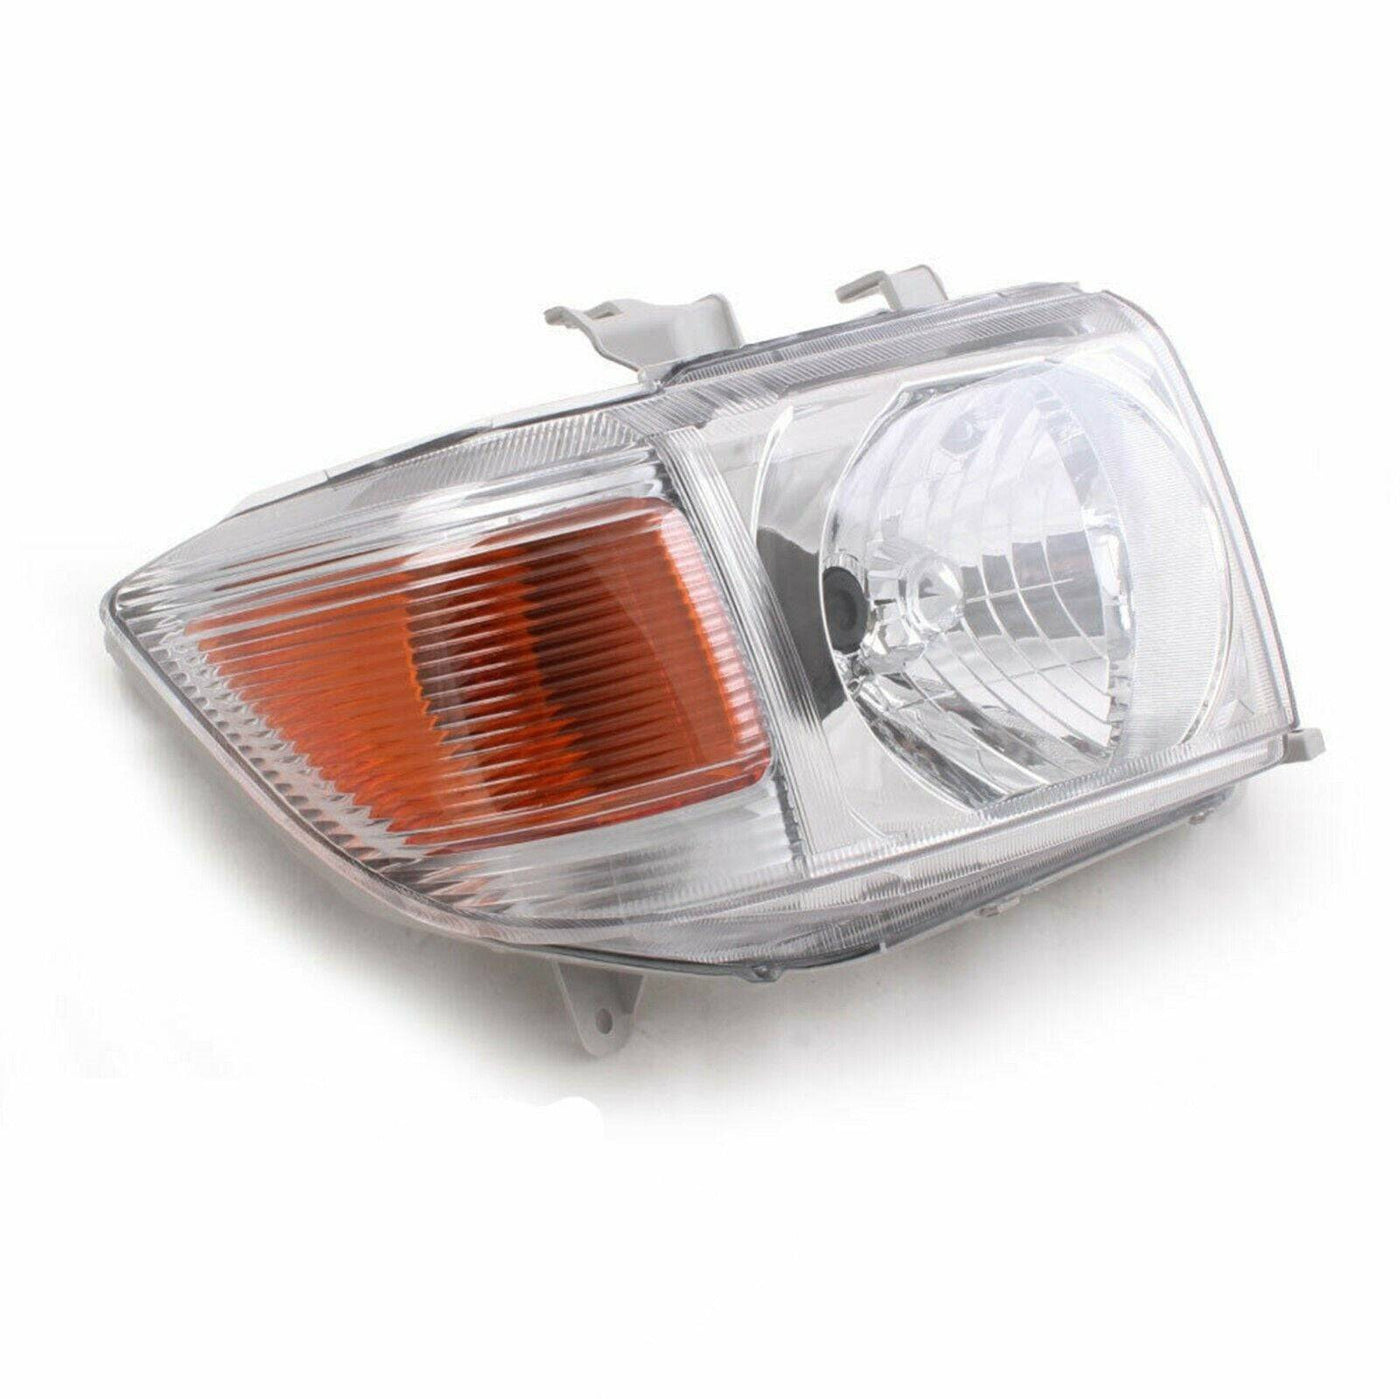 OEM Head Lights Pair Suitable For Toyota Landcruiser 79,78,76 Series 2007+ (Online Only) - OZI4X4 PTY LTD